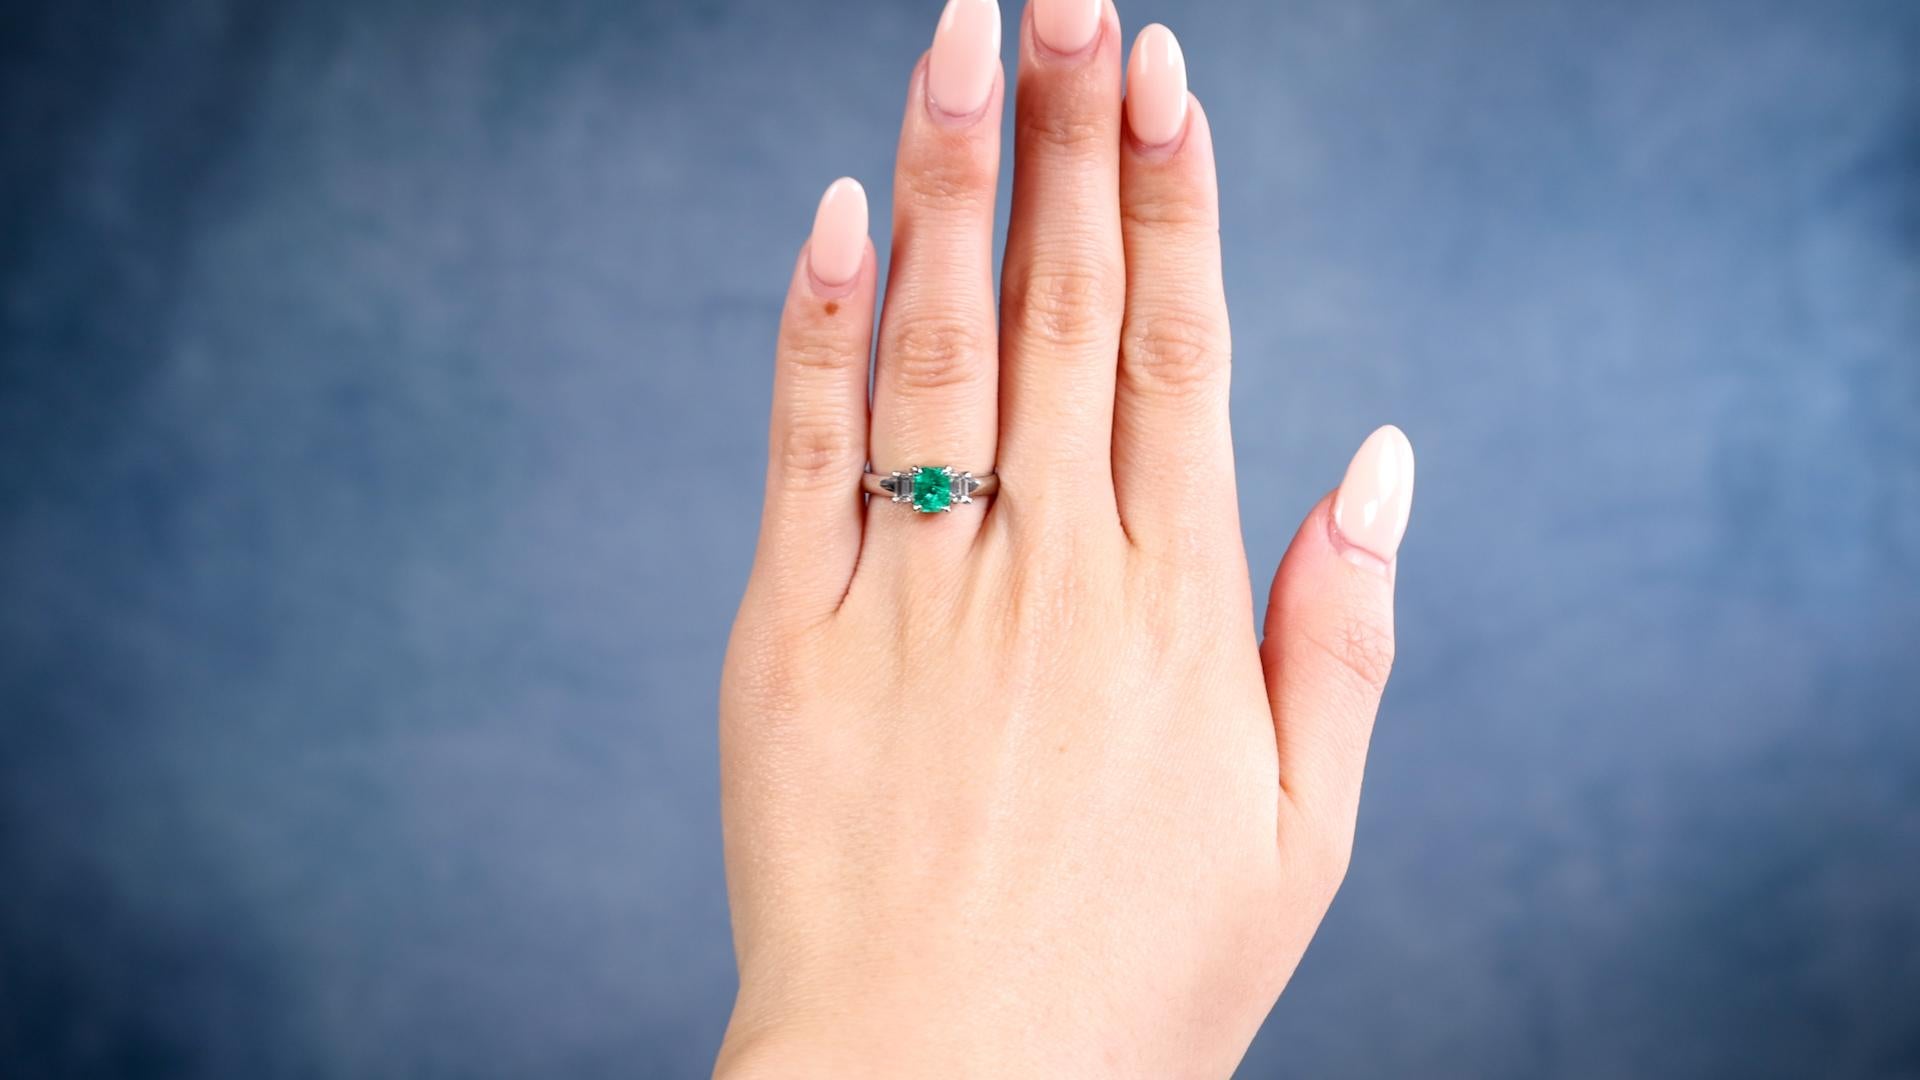 One Vintage 0.69 Carat Emerald and Diamond Platinum Three Stone Ring. Featuring one octagonal step cut emerald of 0.69 carat. Accented by two emerald cut diamonds with a total weight of 0.32 carat, graded F color, VS clarity. Crafted in platinum